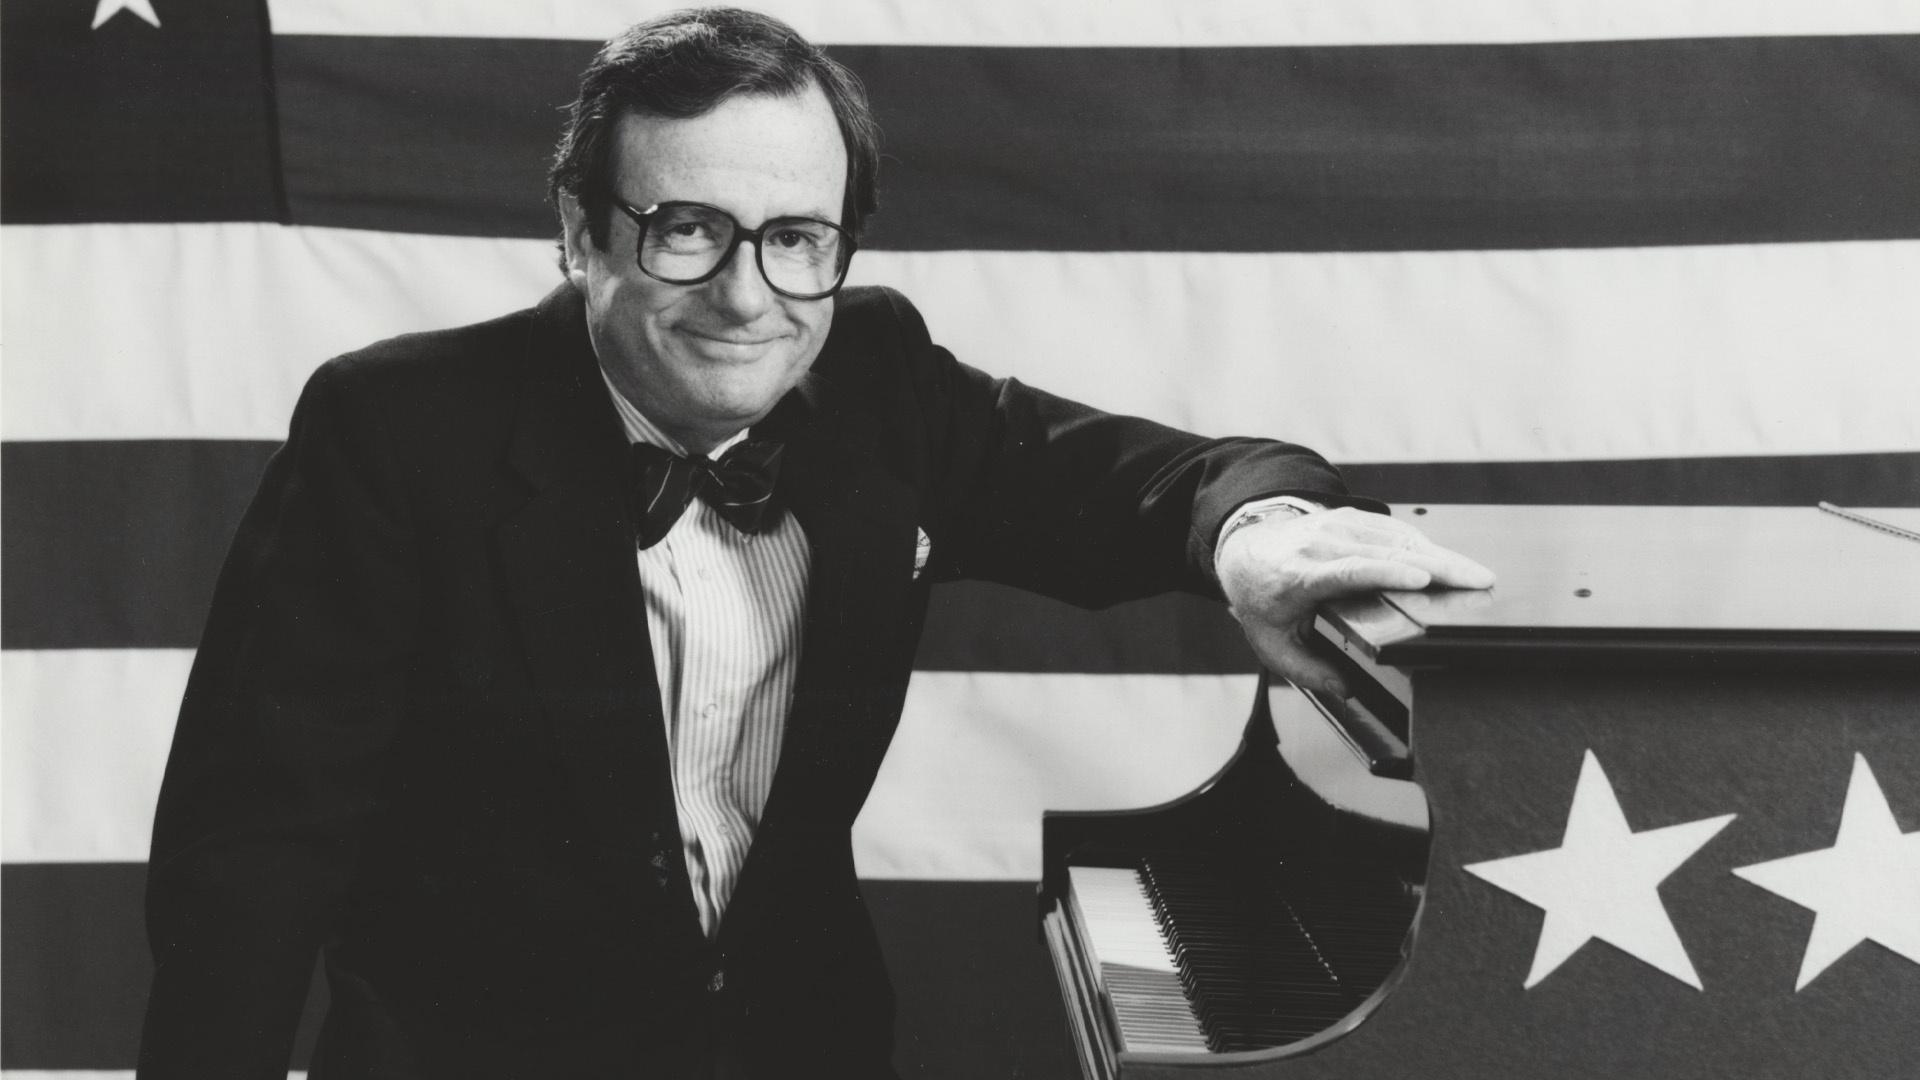 Mark Russell posing at piano with an American flag behind him